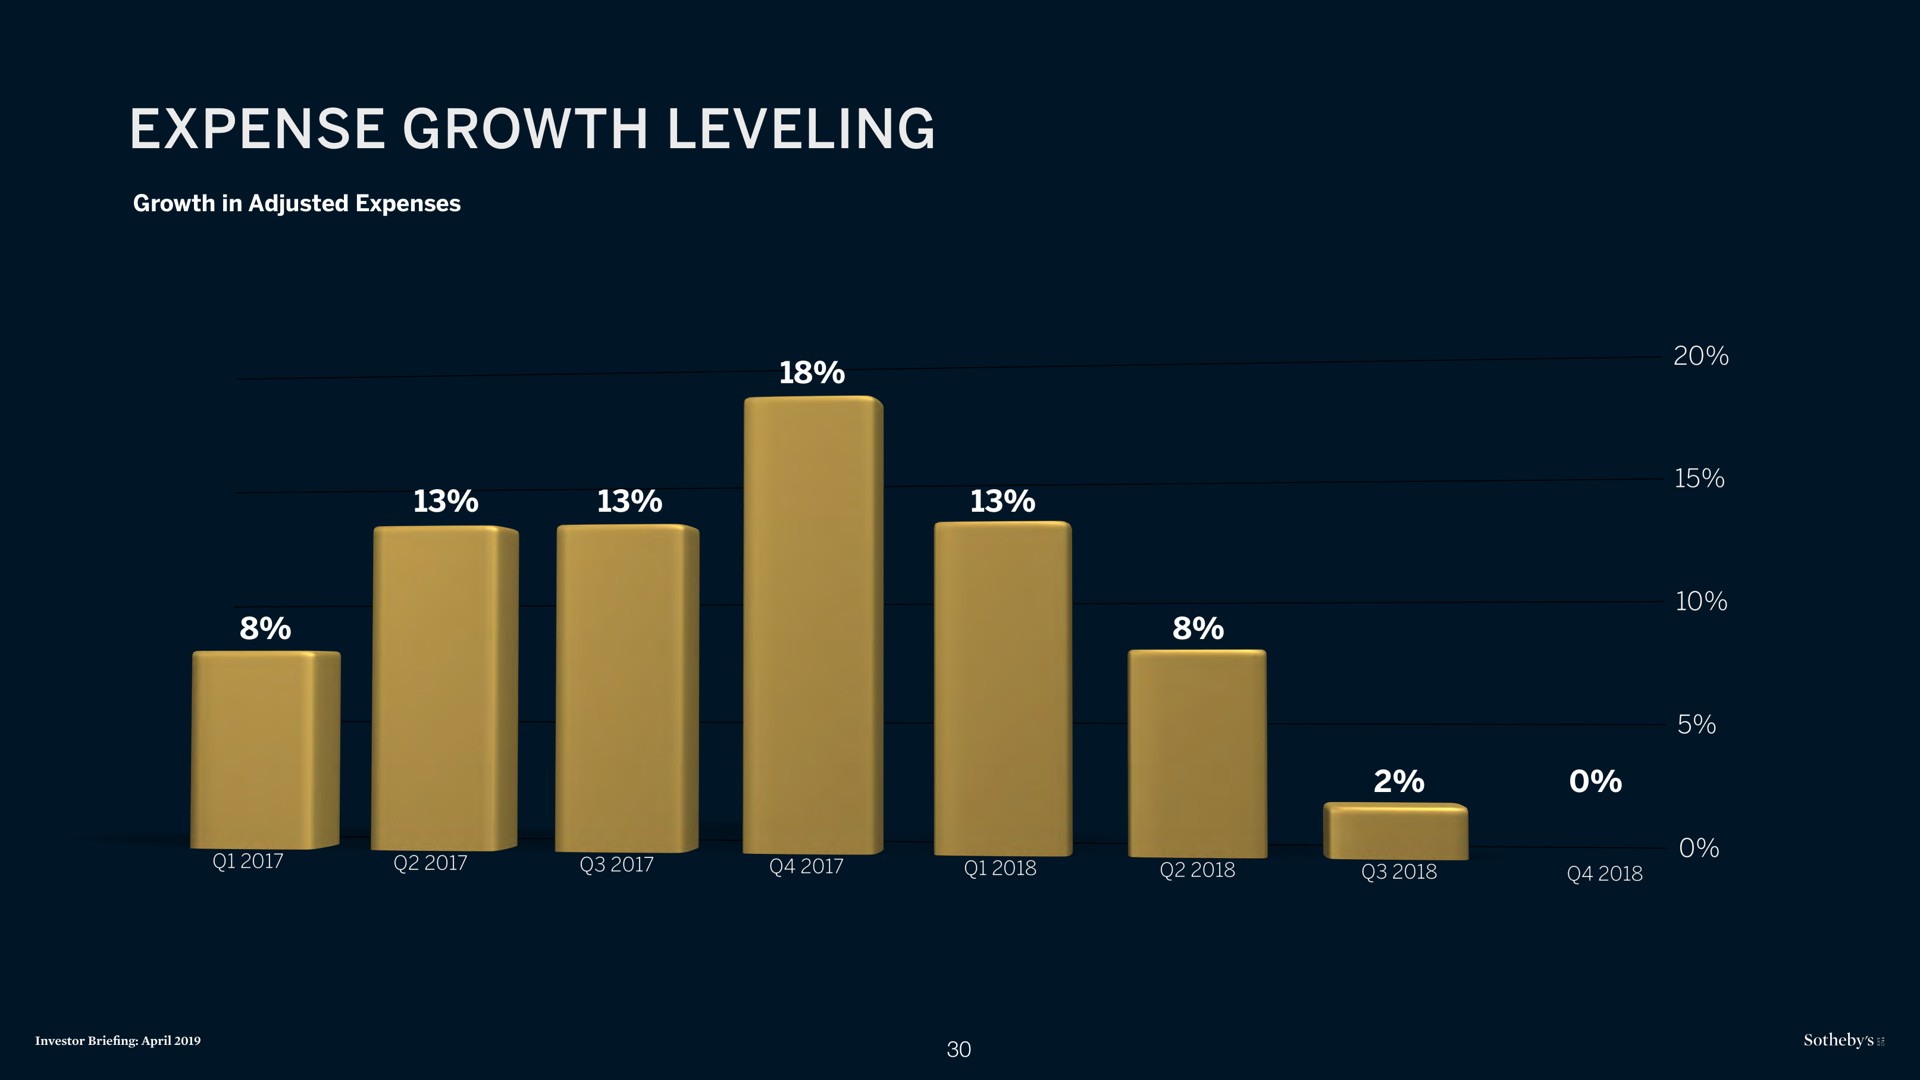 expense growth leveling | Sotheby's